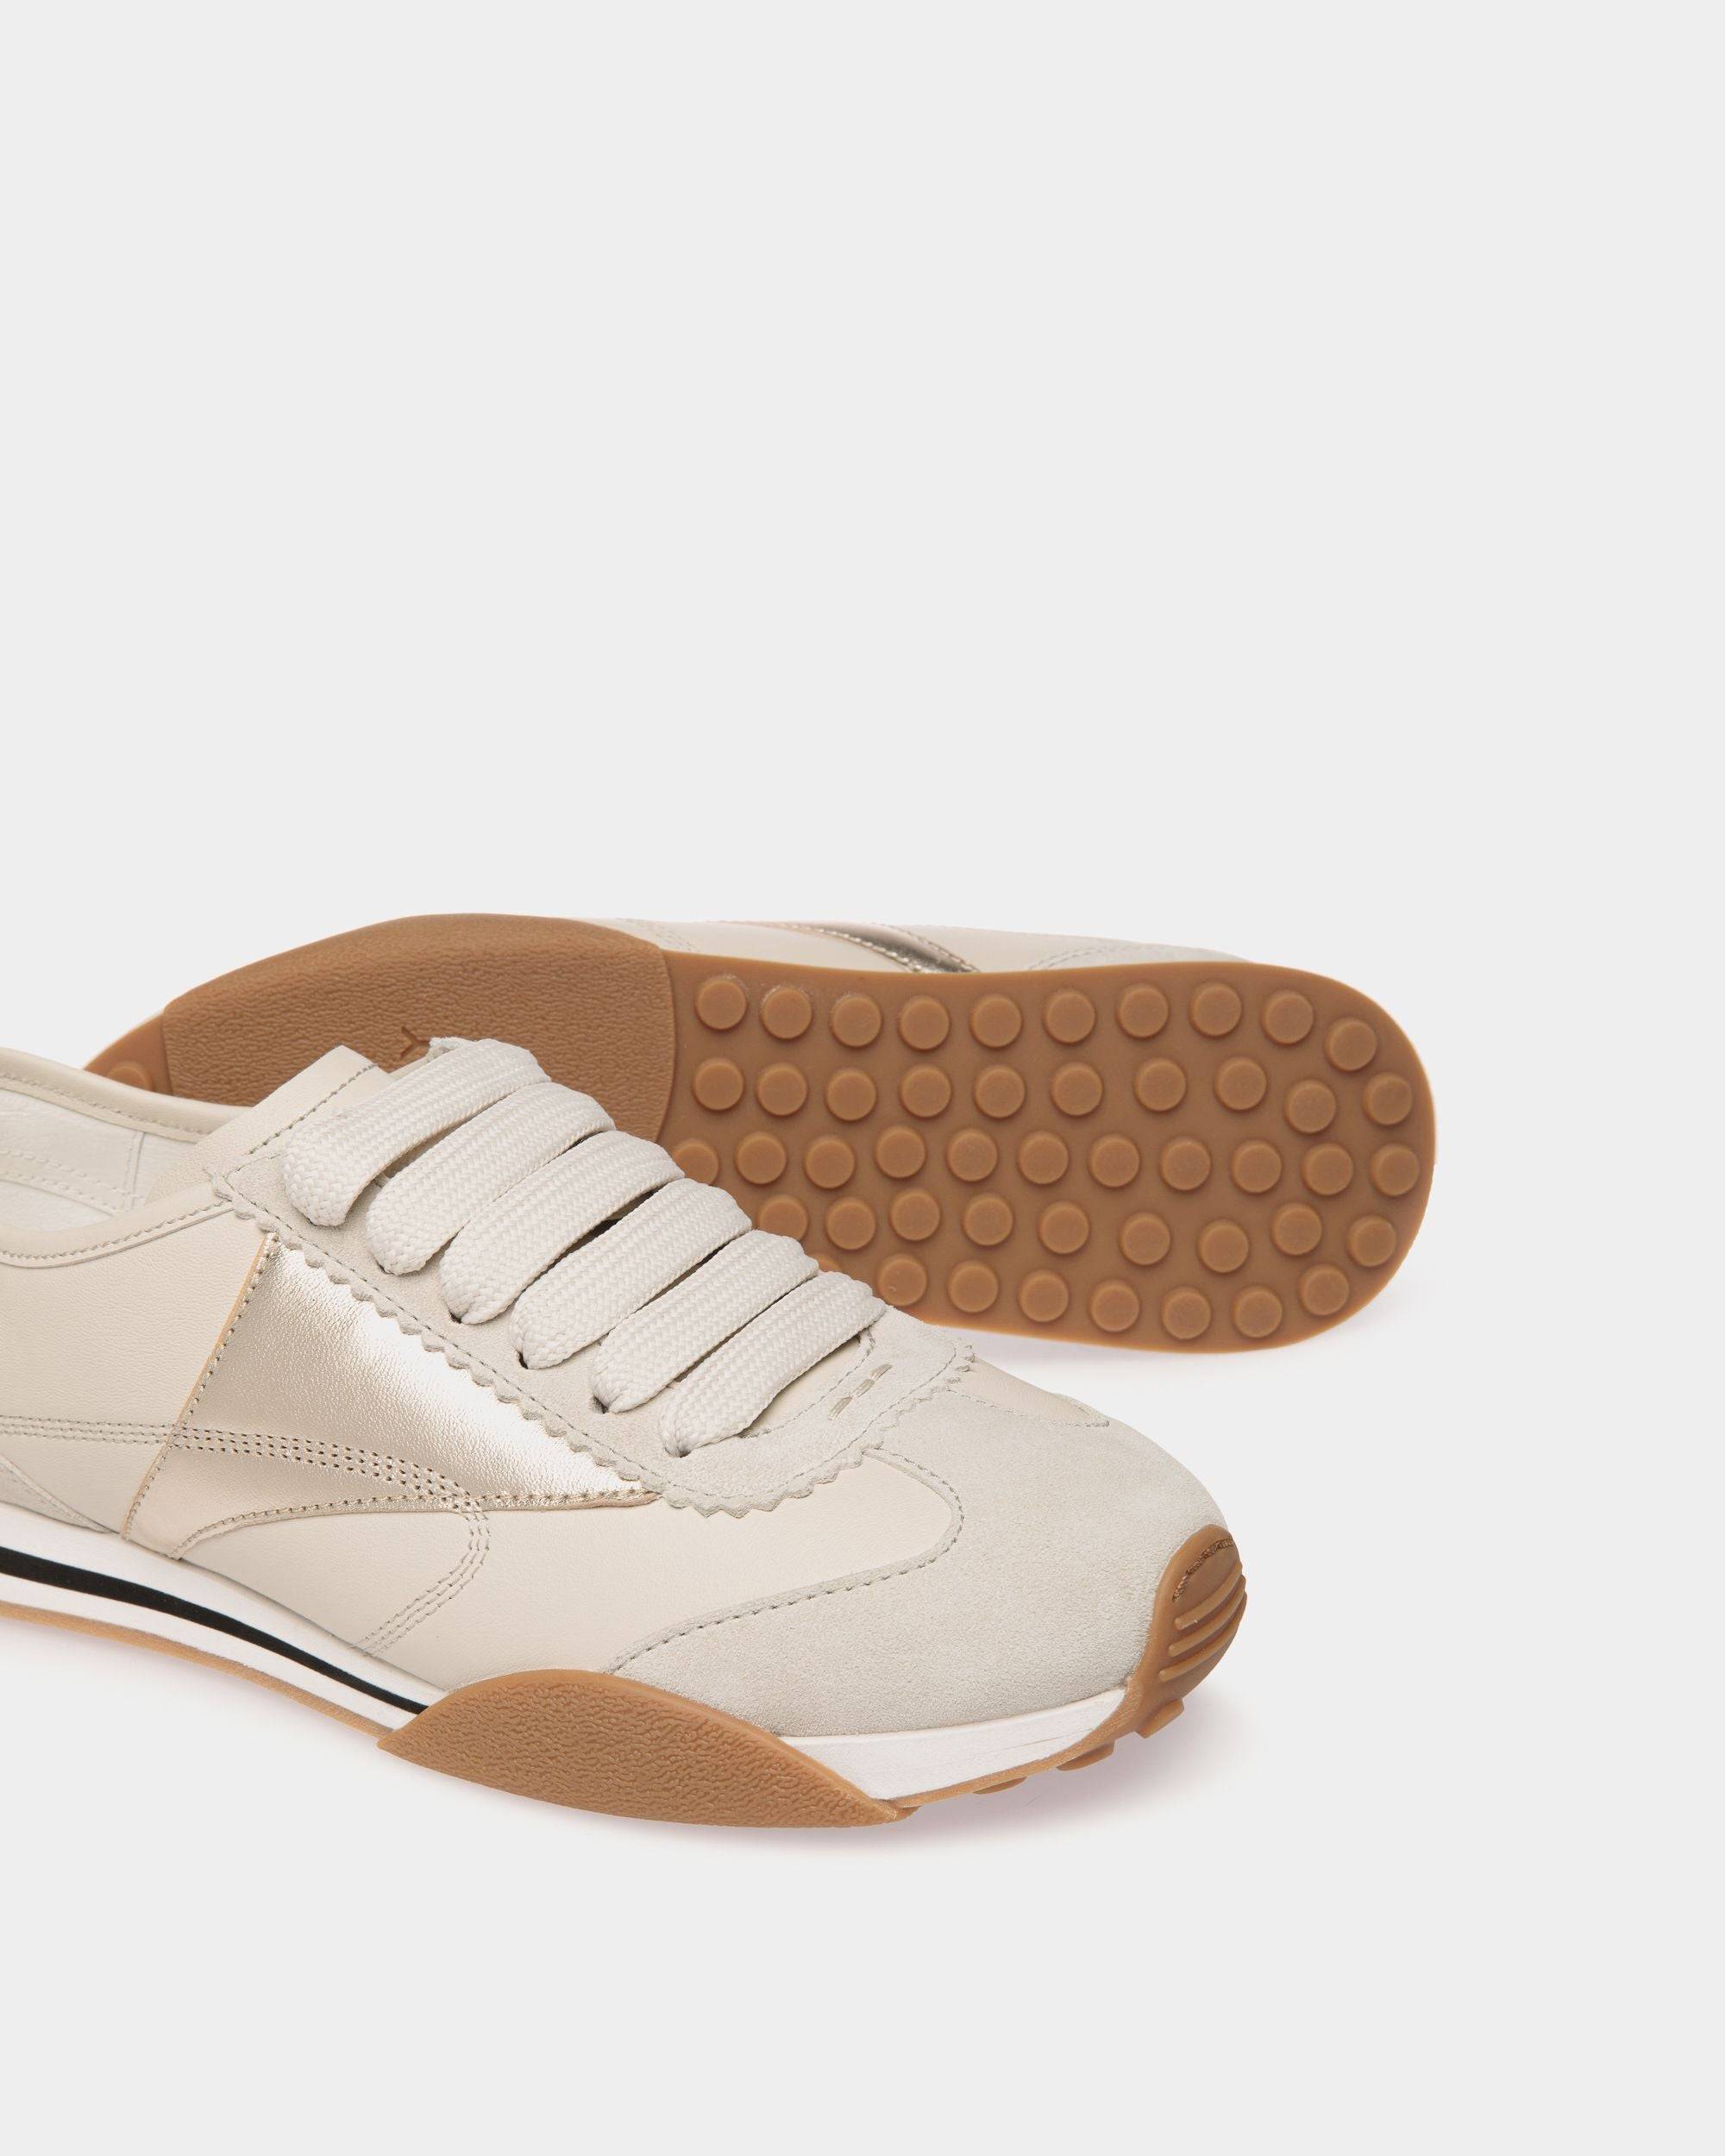 Sussex Sneaker In White And Gold Leather - Women's - Bally - 04